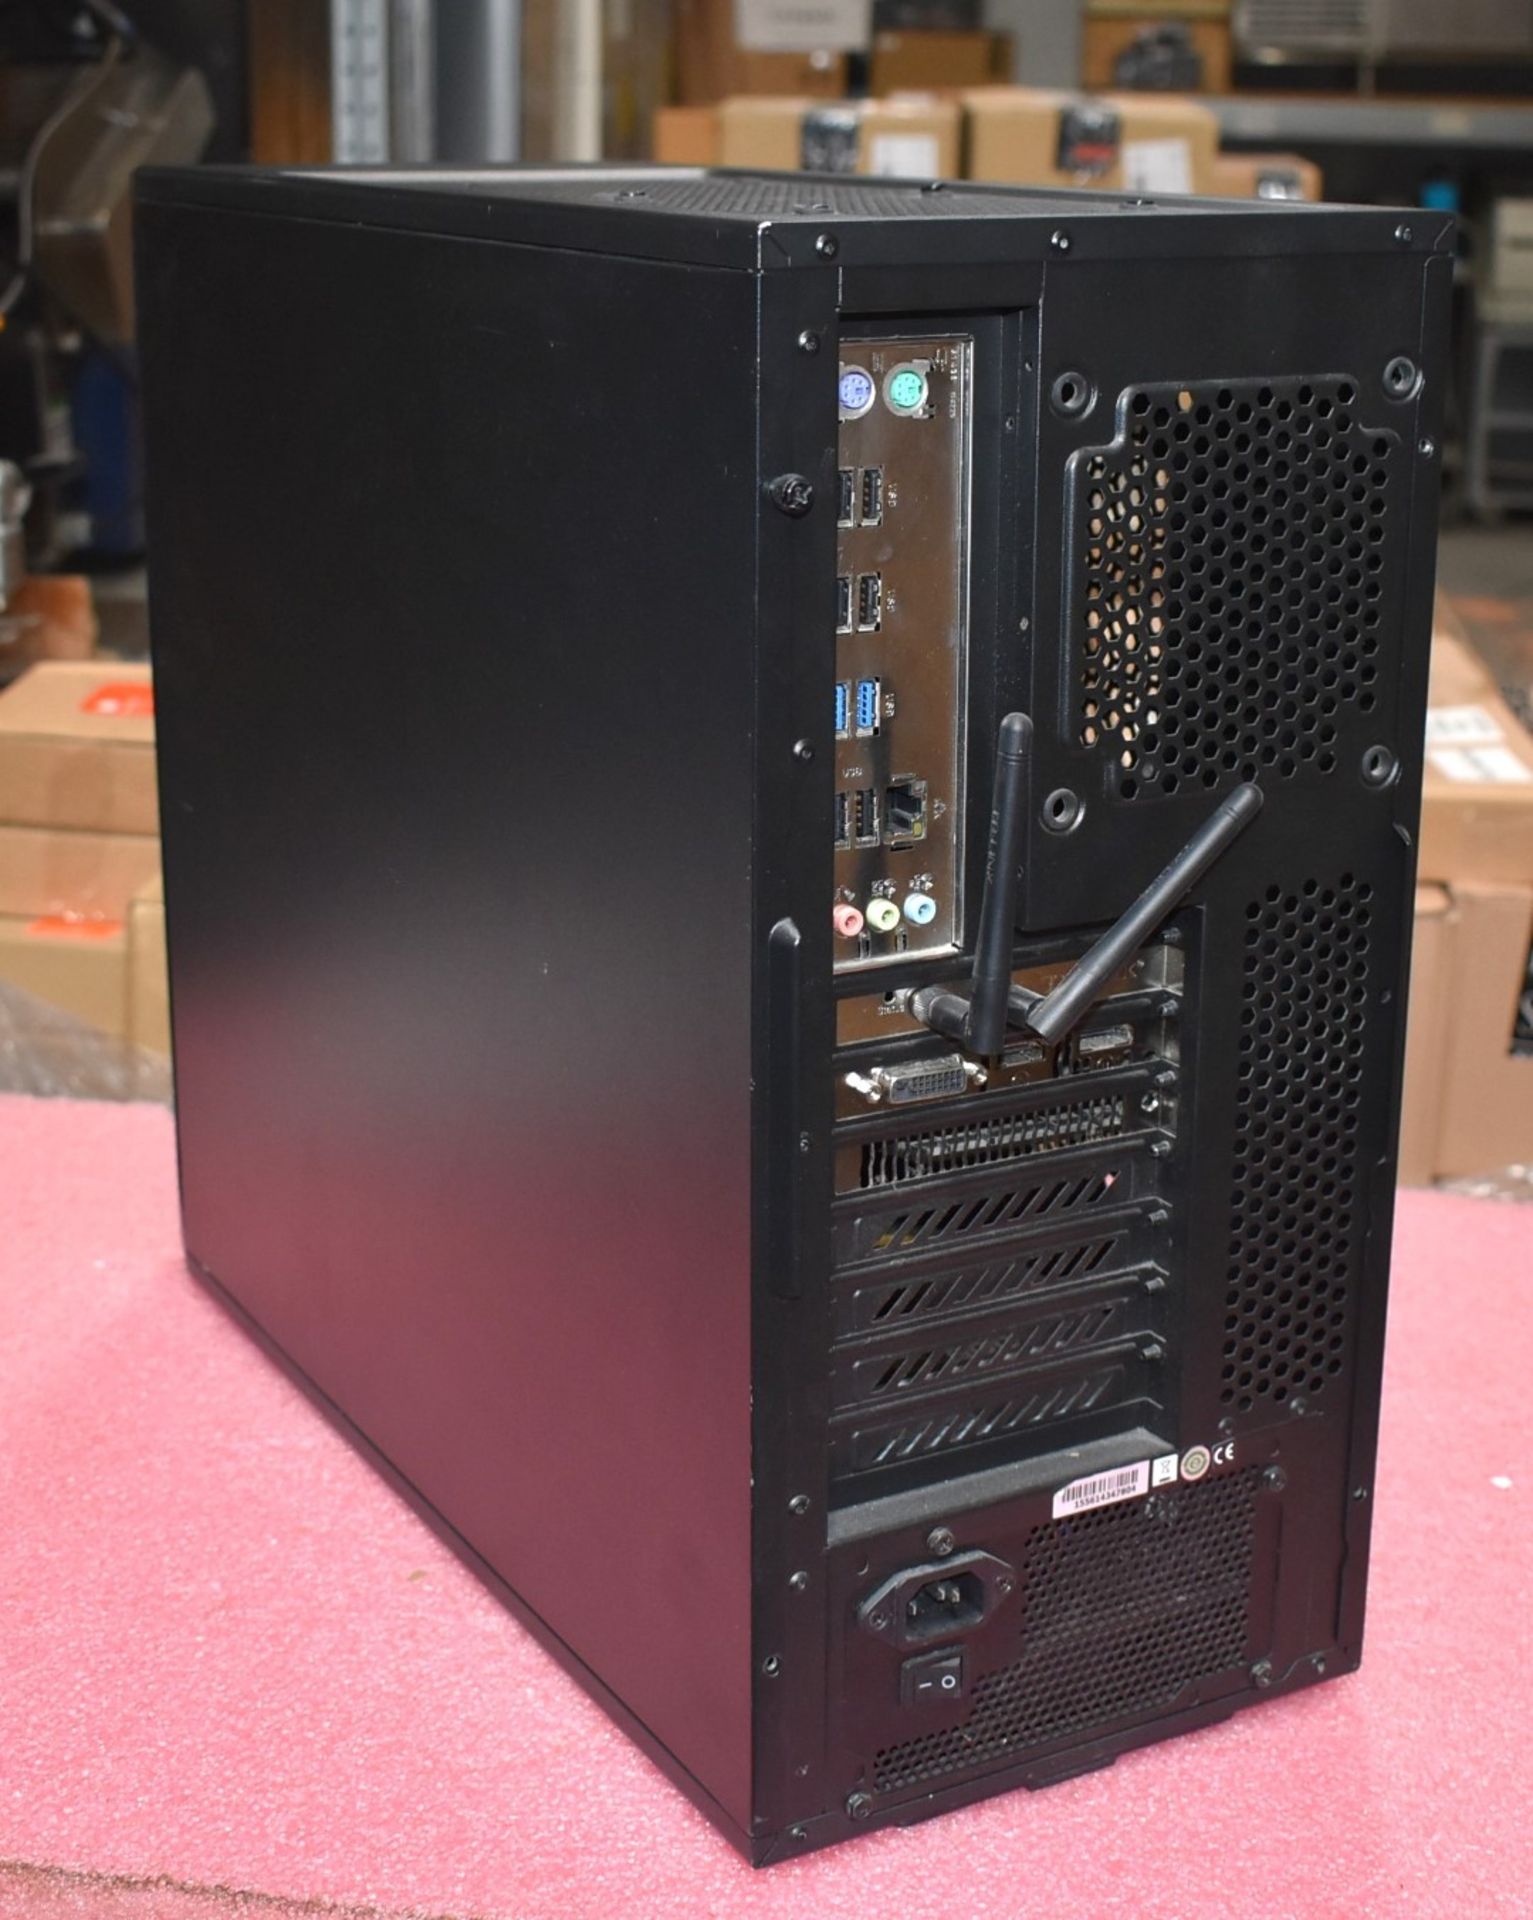 1 x Desktop Gaming PC Featuring an AMD FX6350 Processor, 8GB Ram and a GTX1050ti Graphics Card - Image 4 of 11